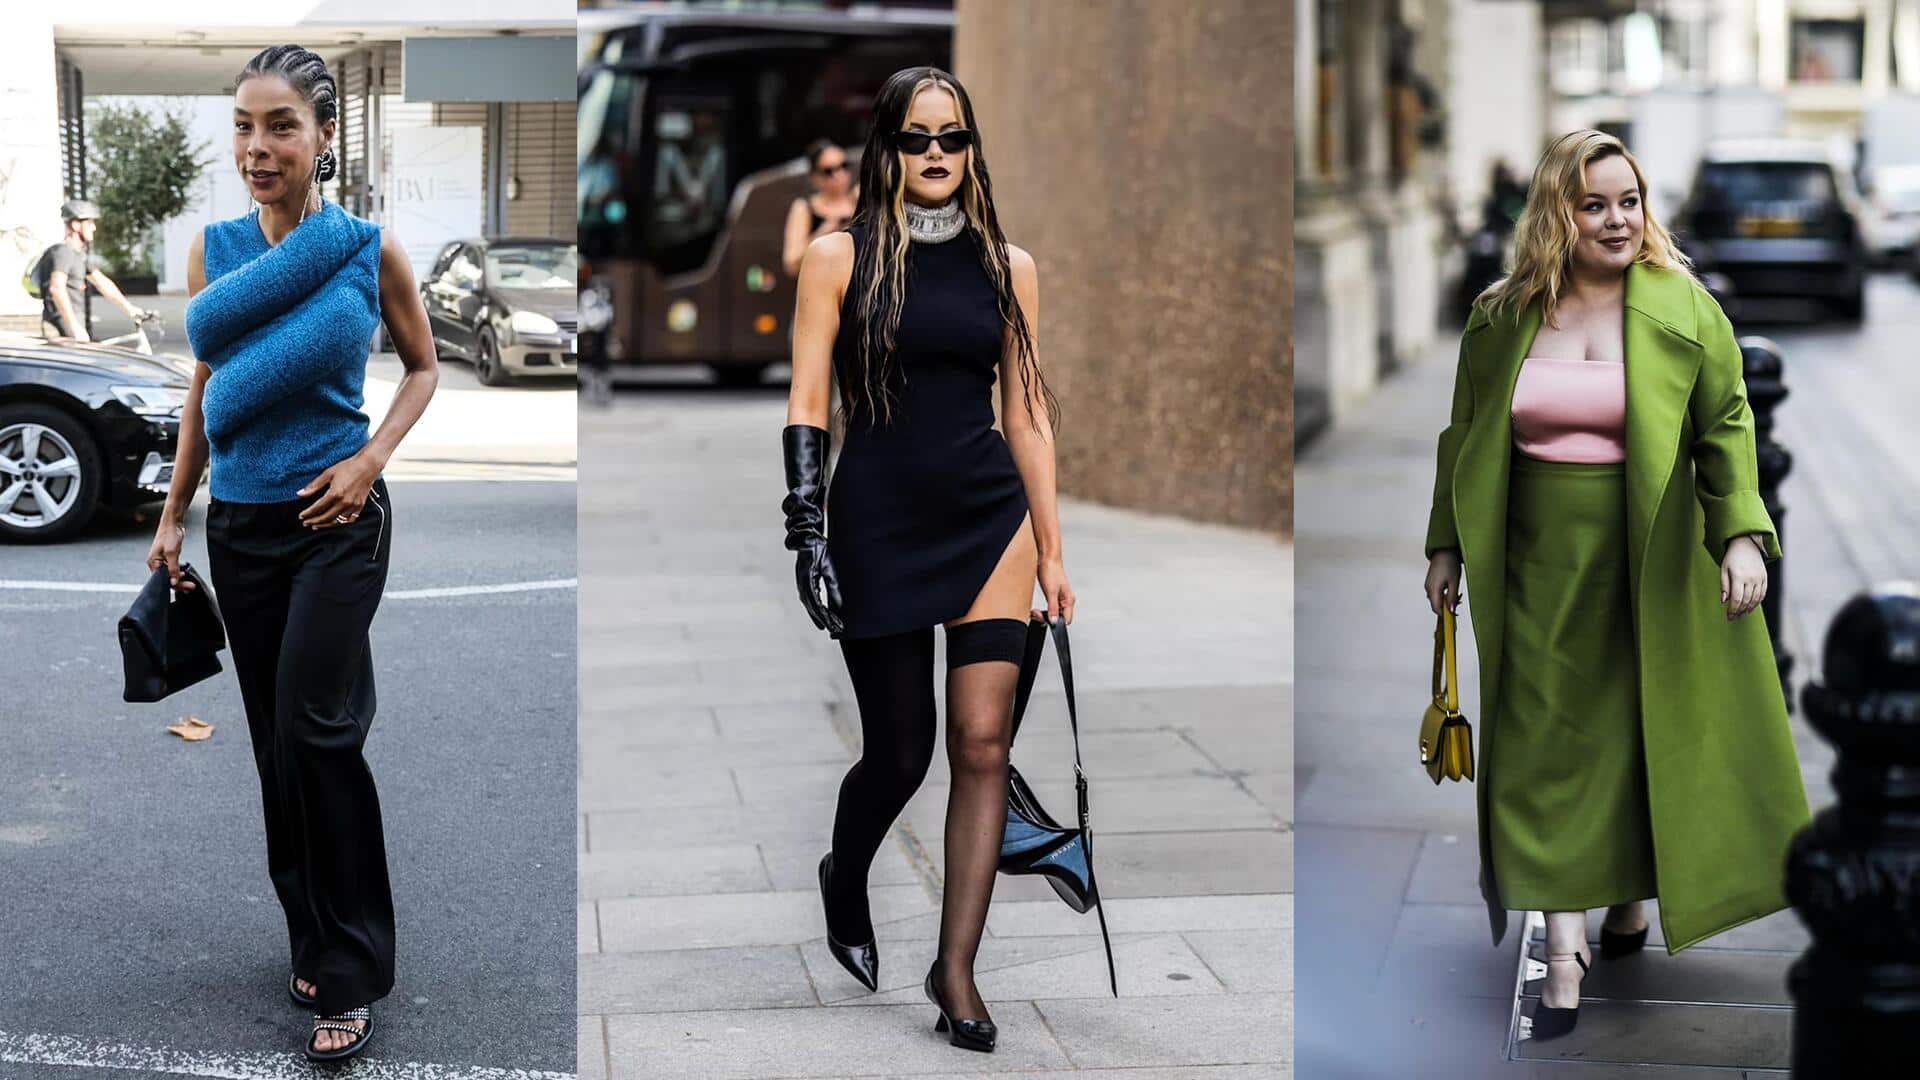 London Fashion Week: Coolest street style trends from the week